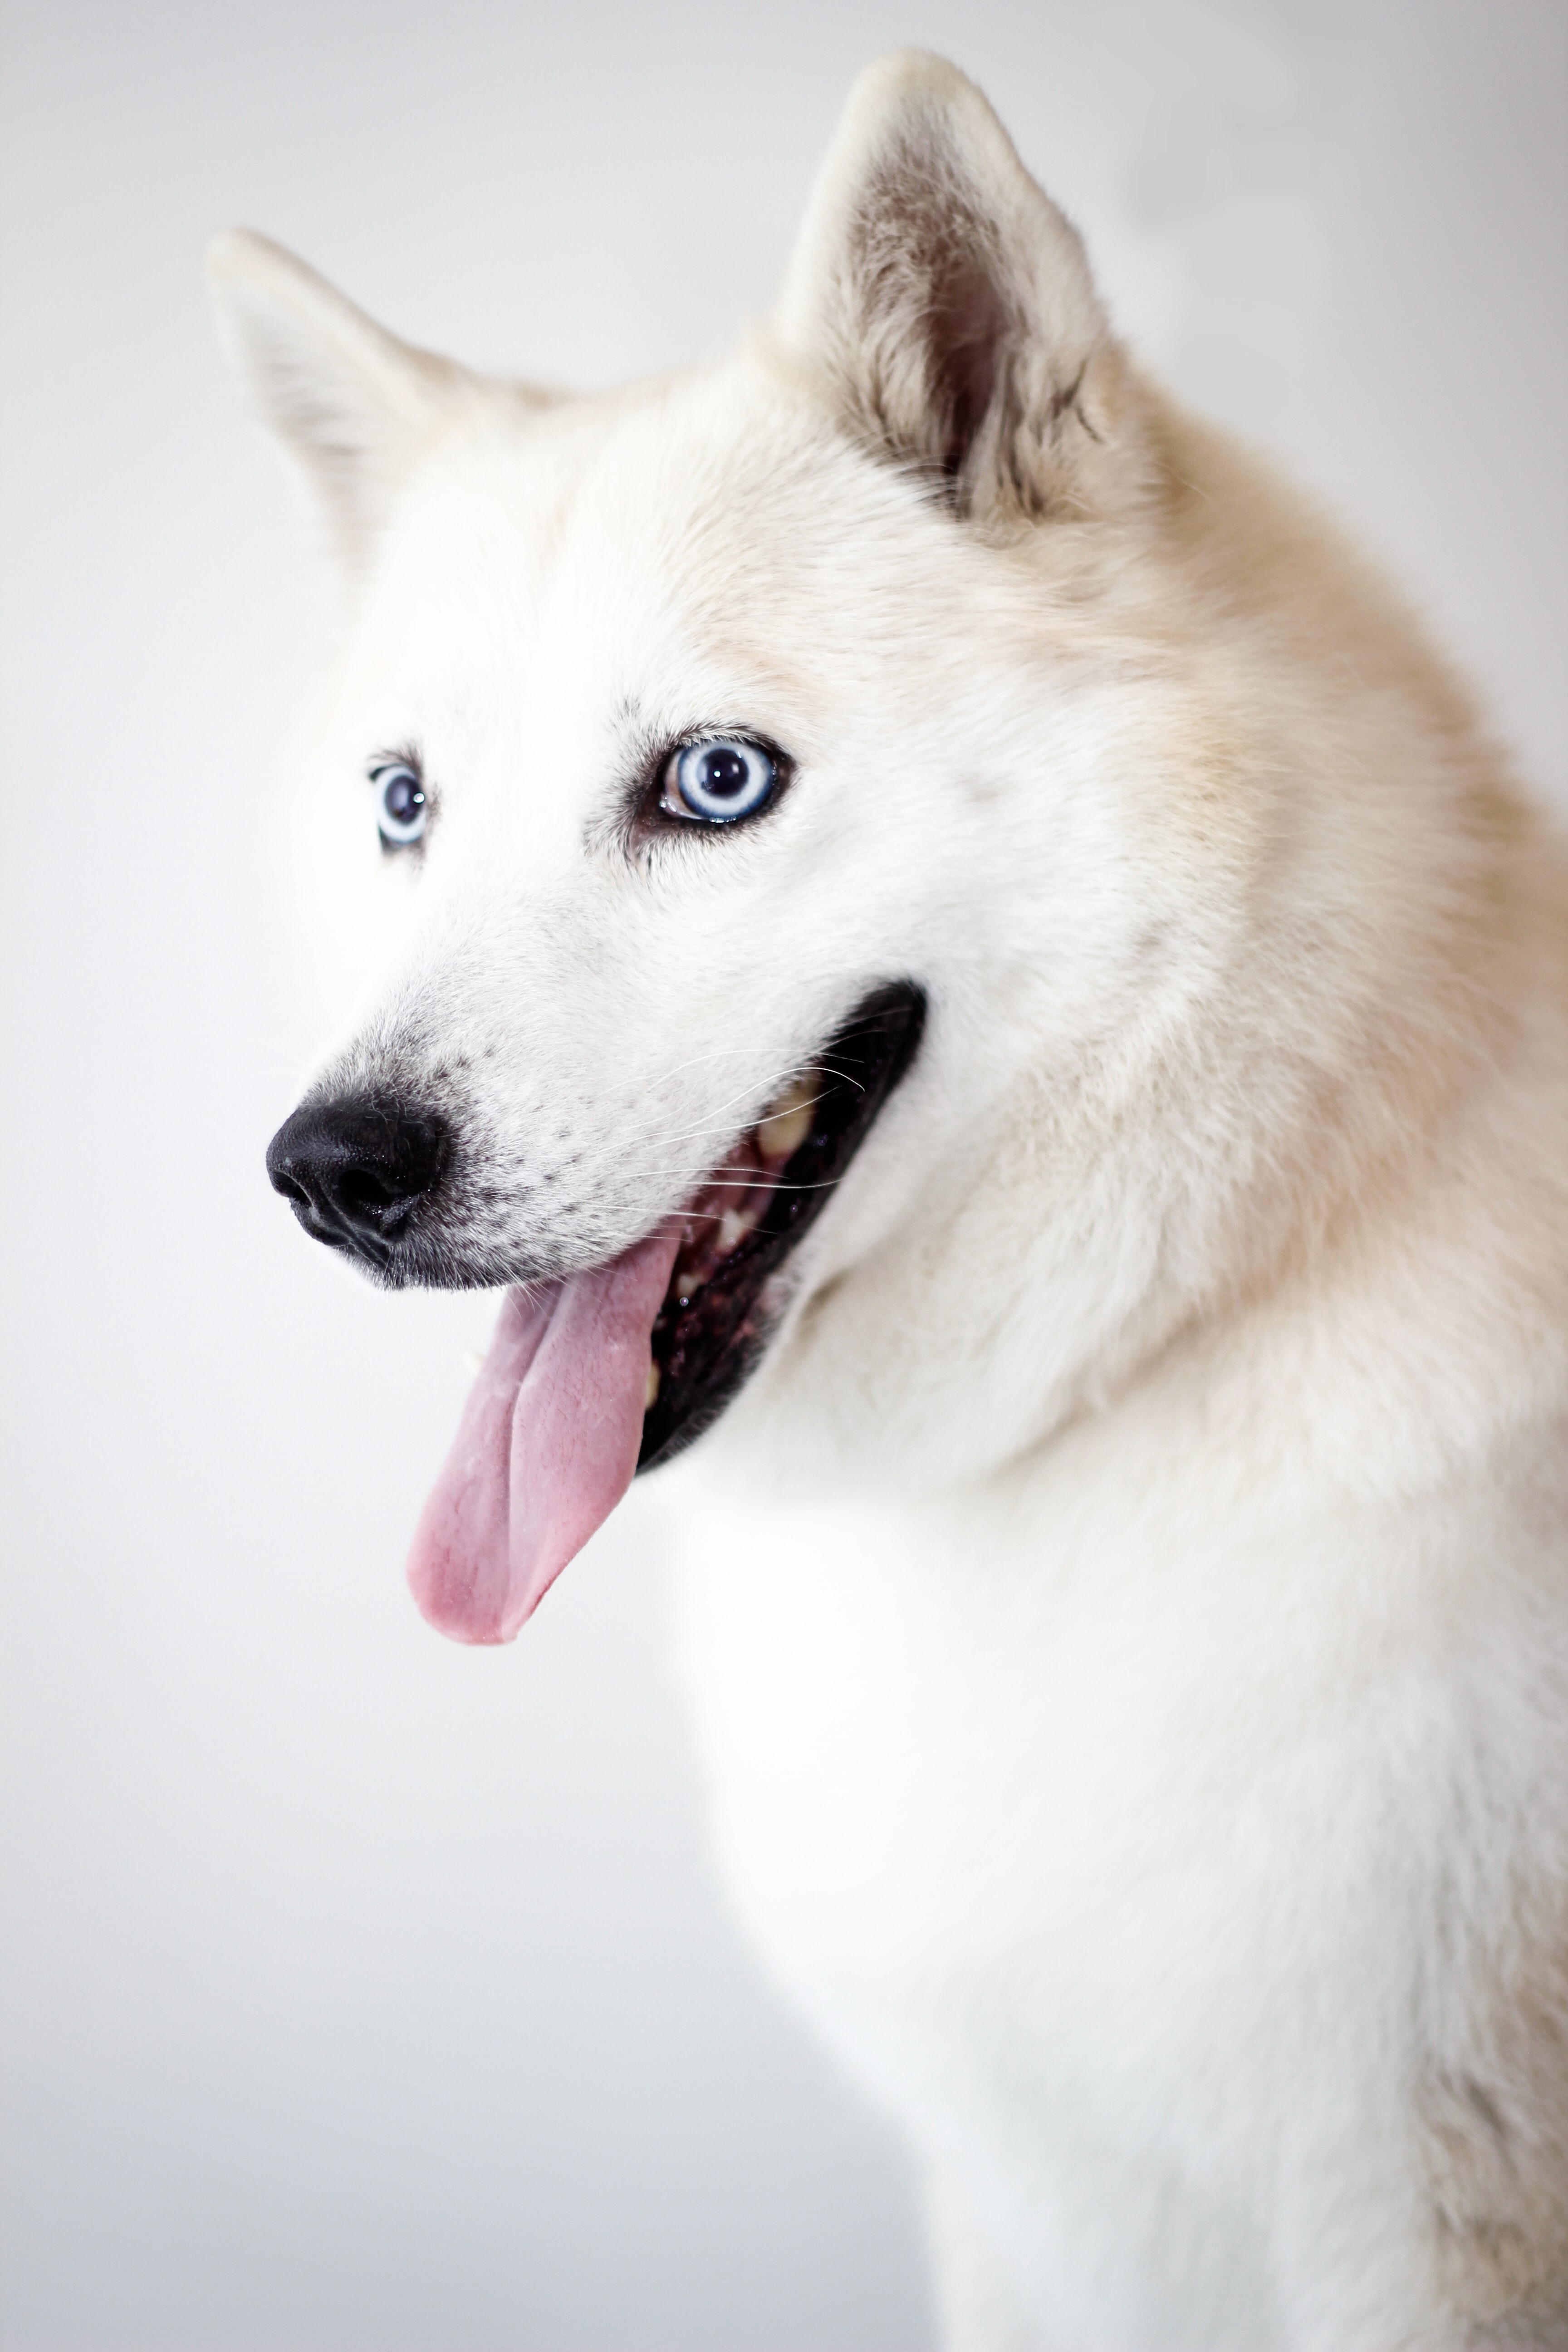 tongue stuck out, husky, animals, white, dog, protruding tongue phone wallpaper